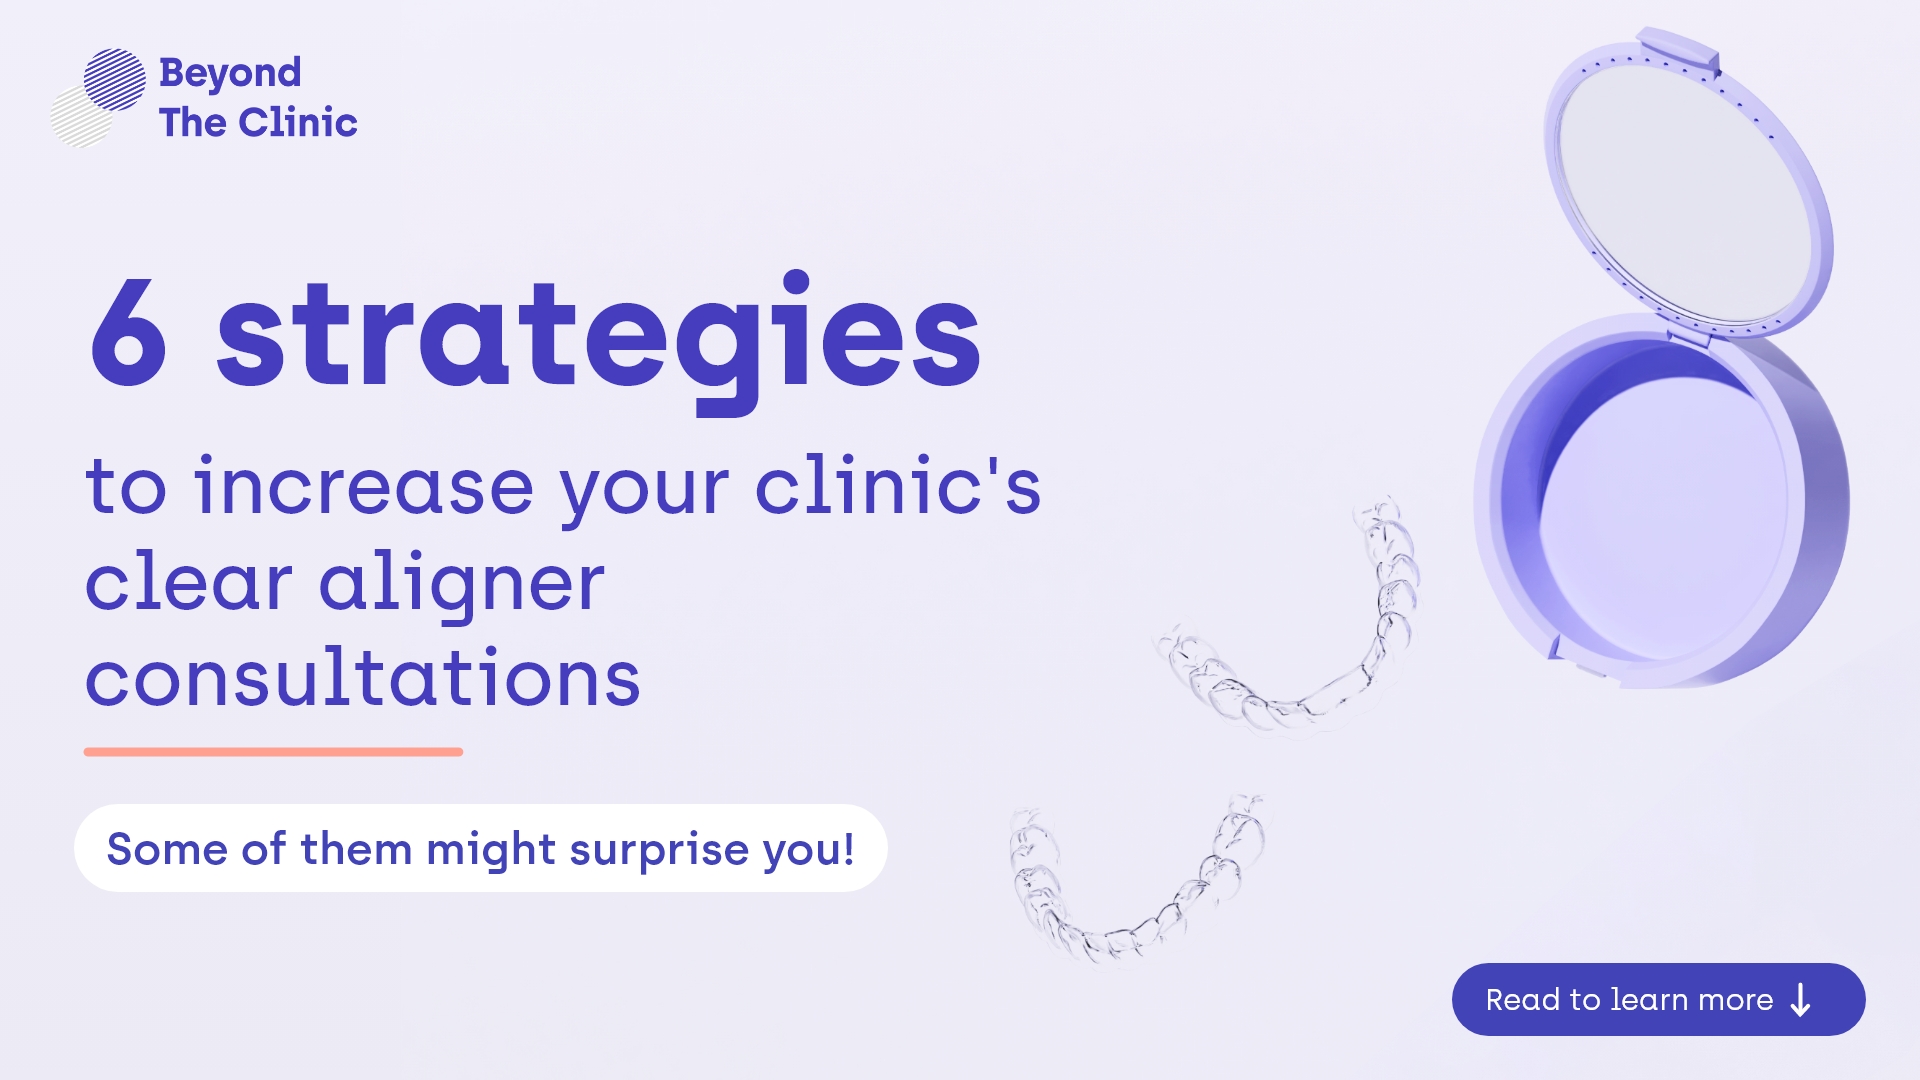 6 strategies to increase your clinic's clear aligner consultations